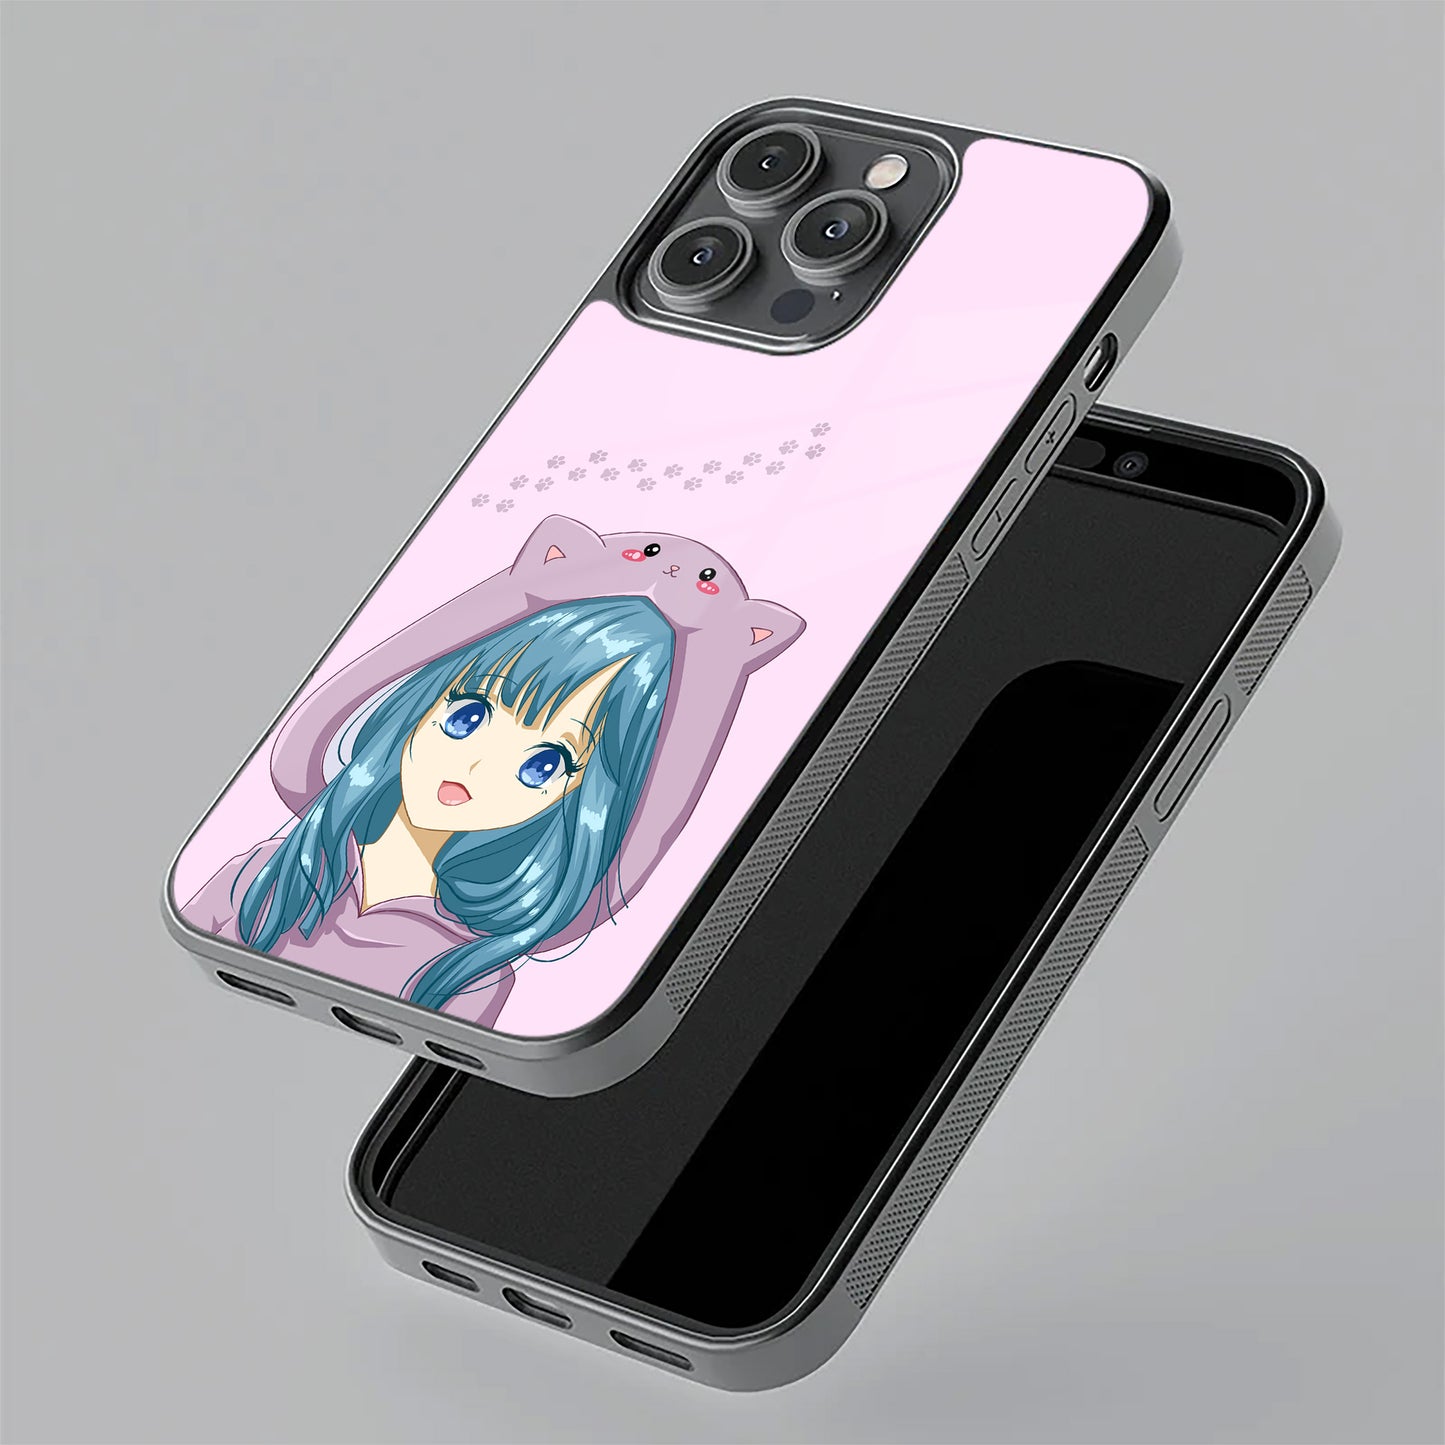 Purple Aesthetic Girl With Cat Phone Glass Case Cover For POCO